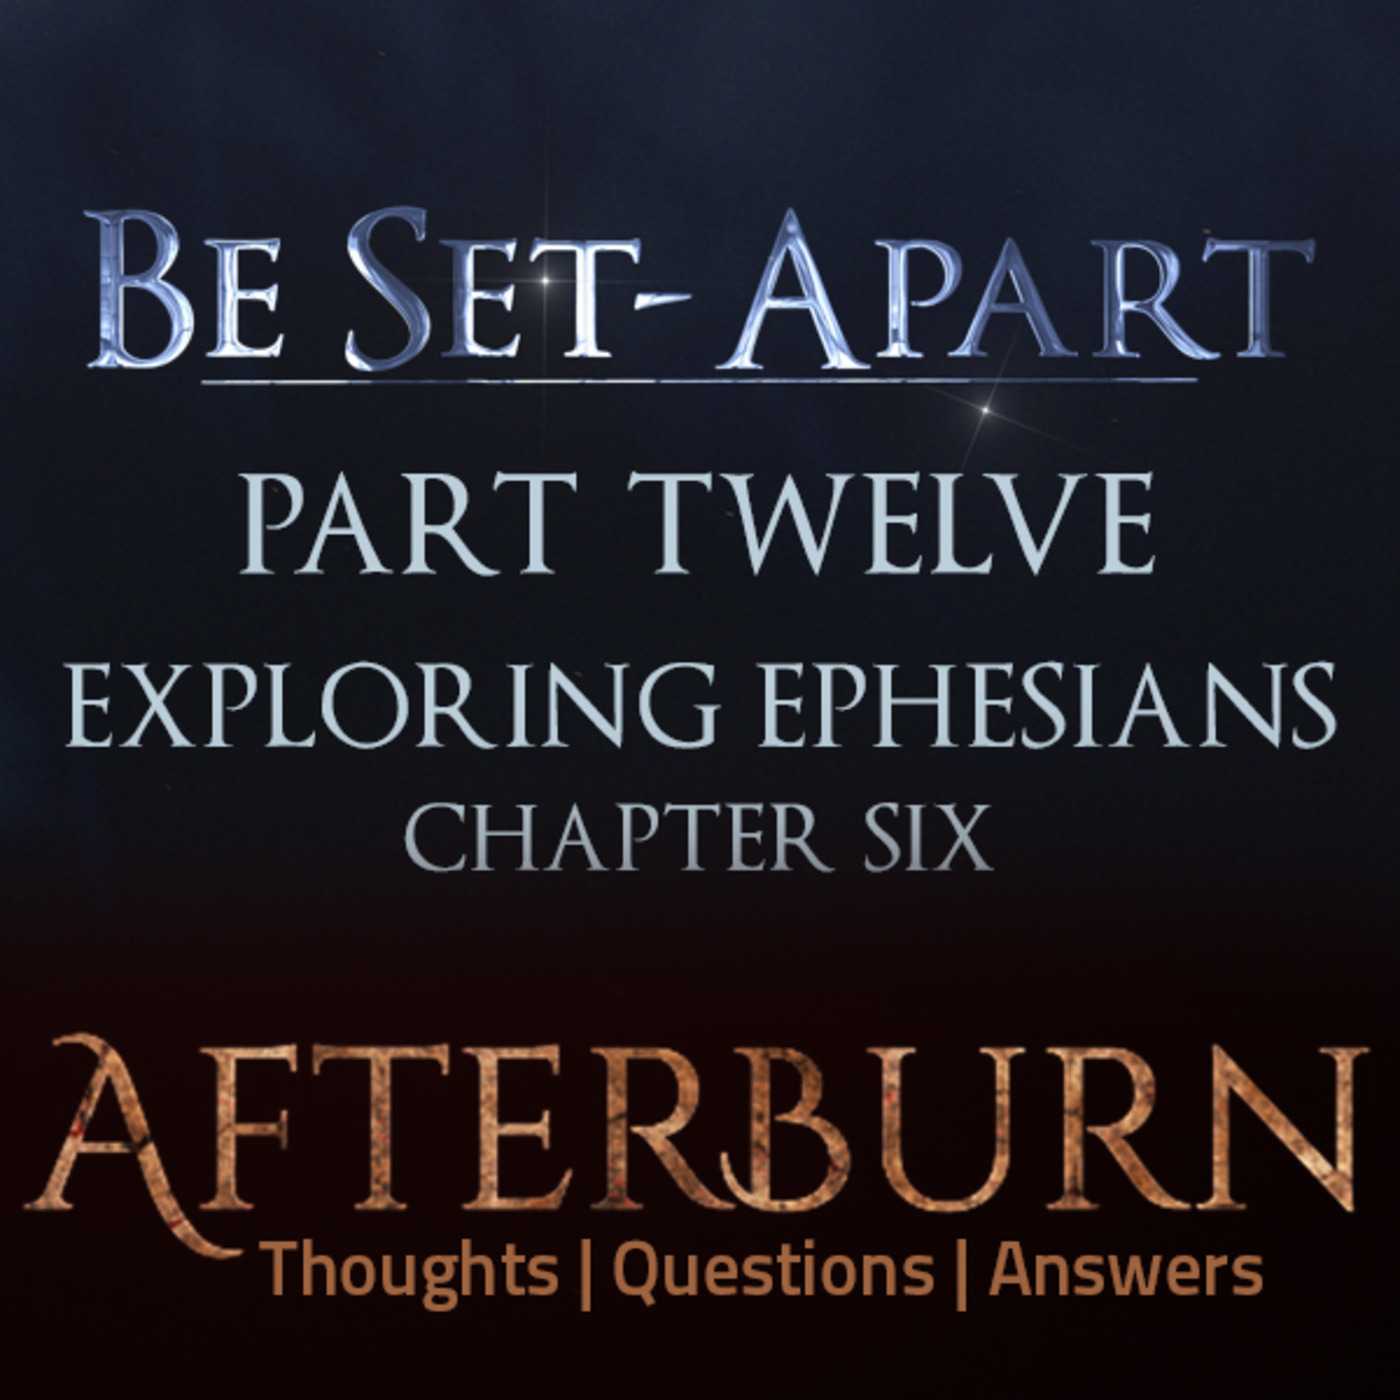 Episode 786: Afterburn | Thoughts, Q&A on Be Set-Apart | Part Twelve | Exploring Ephesians Chapter Six